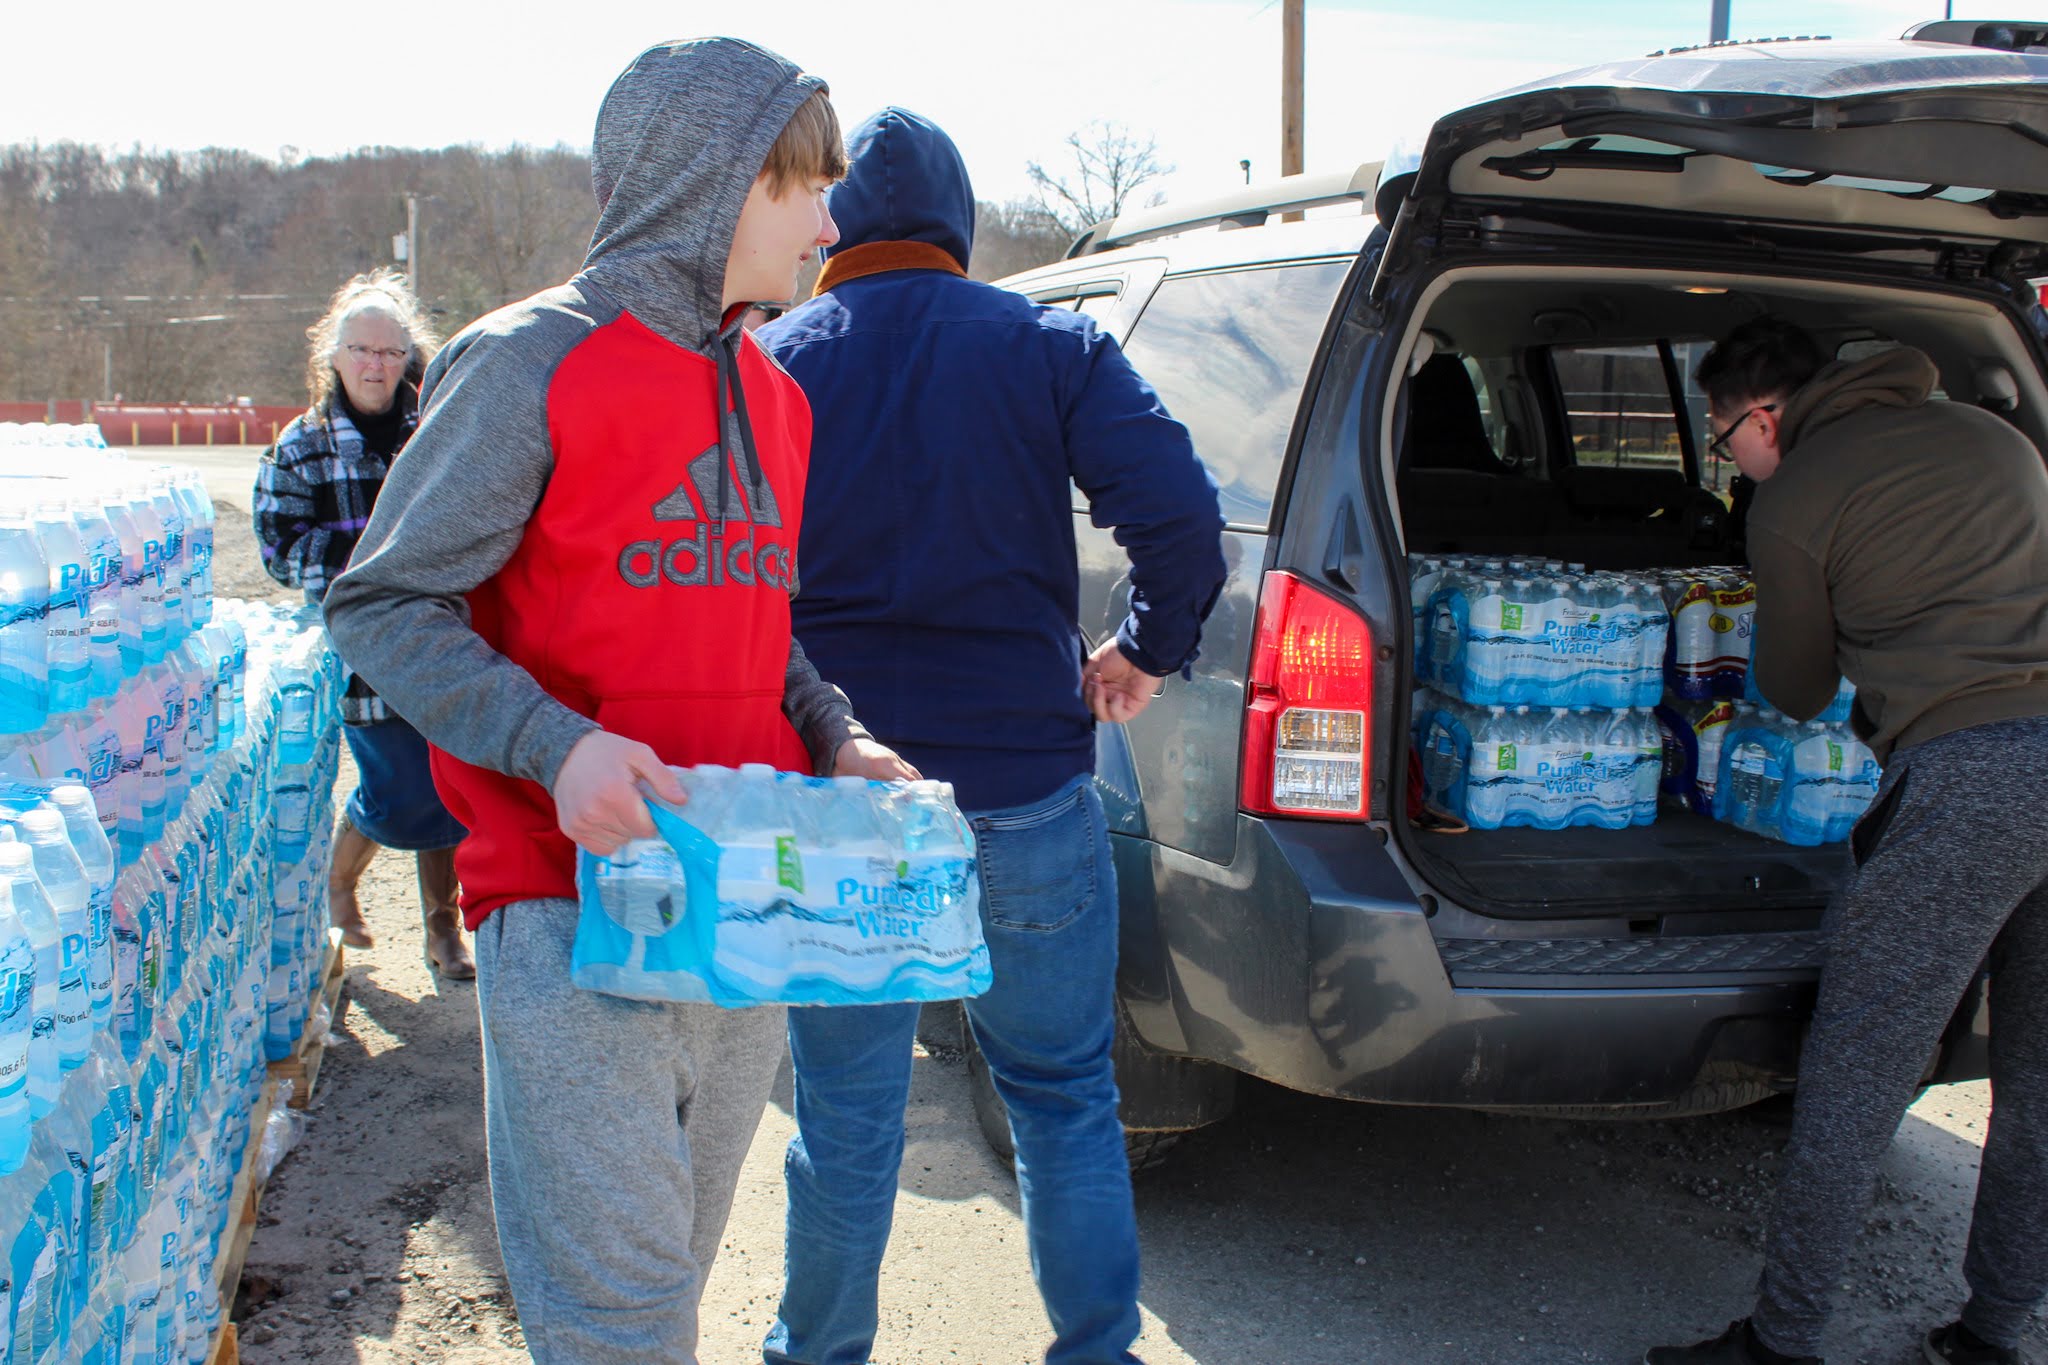 Volunteers work to distribute bottled water to residents of East Palestine. These efforts were supported by Feed the Children and Niagara Bottling.